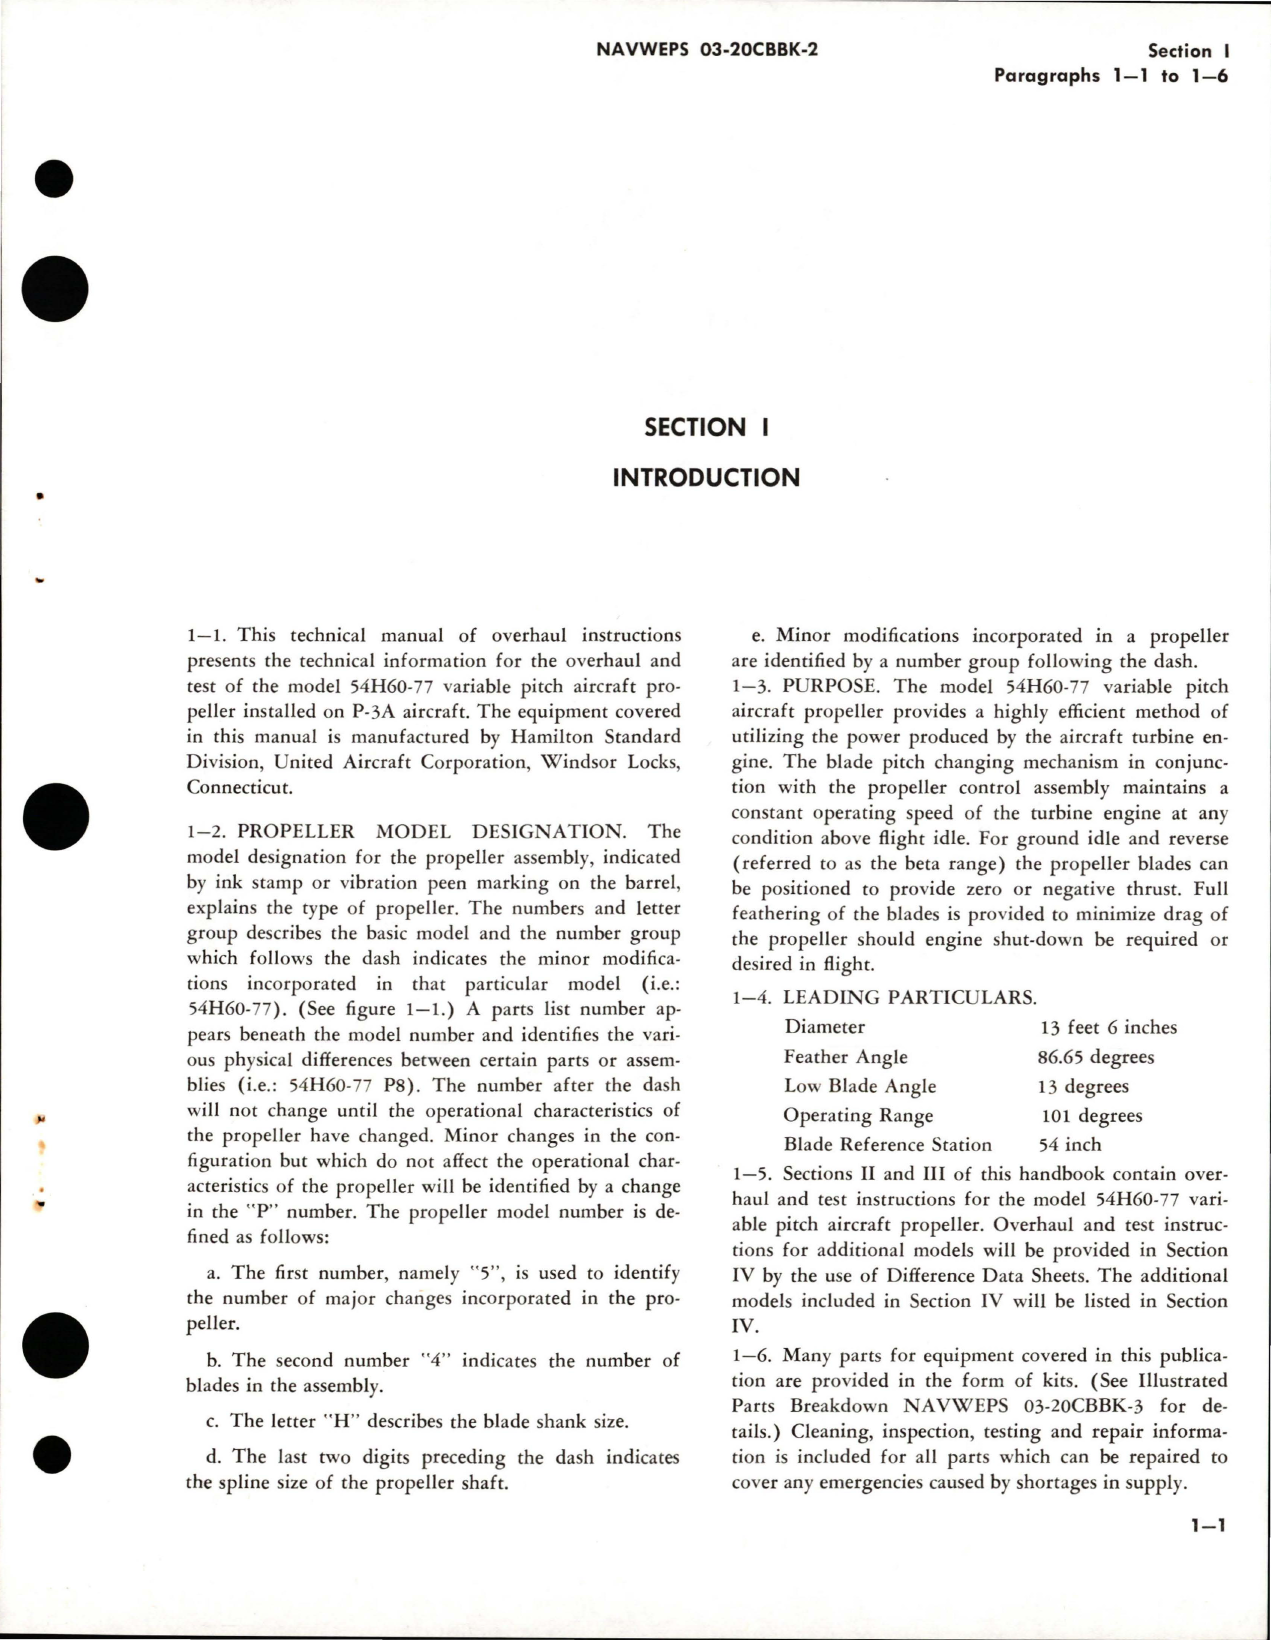 Sample page 5 from AirCorps Library document: Overhaul Instructions for Variable Pitch Propeller - Model 54H60-77